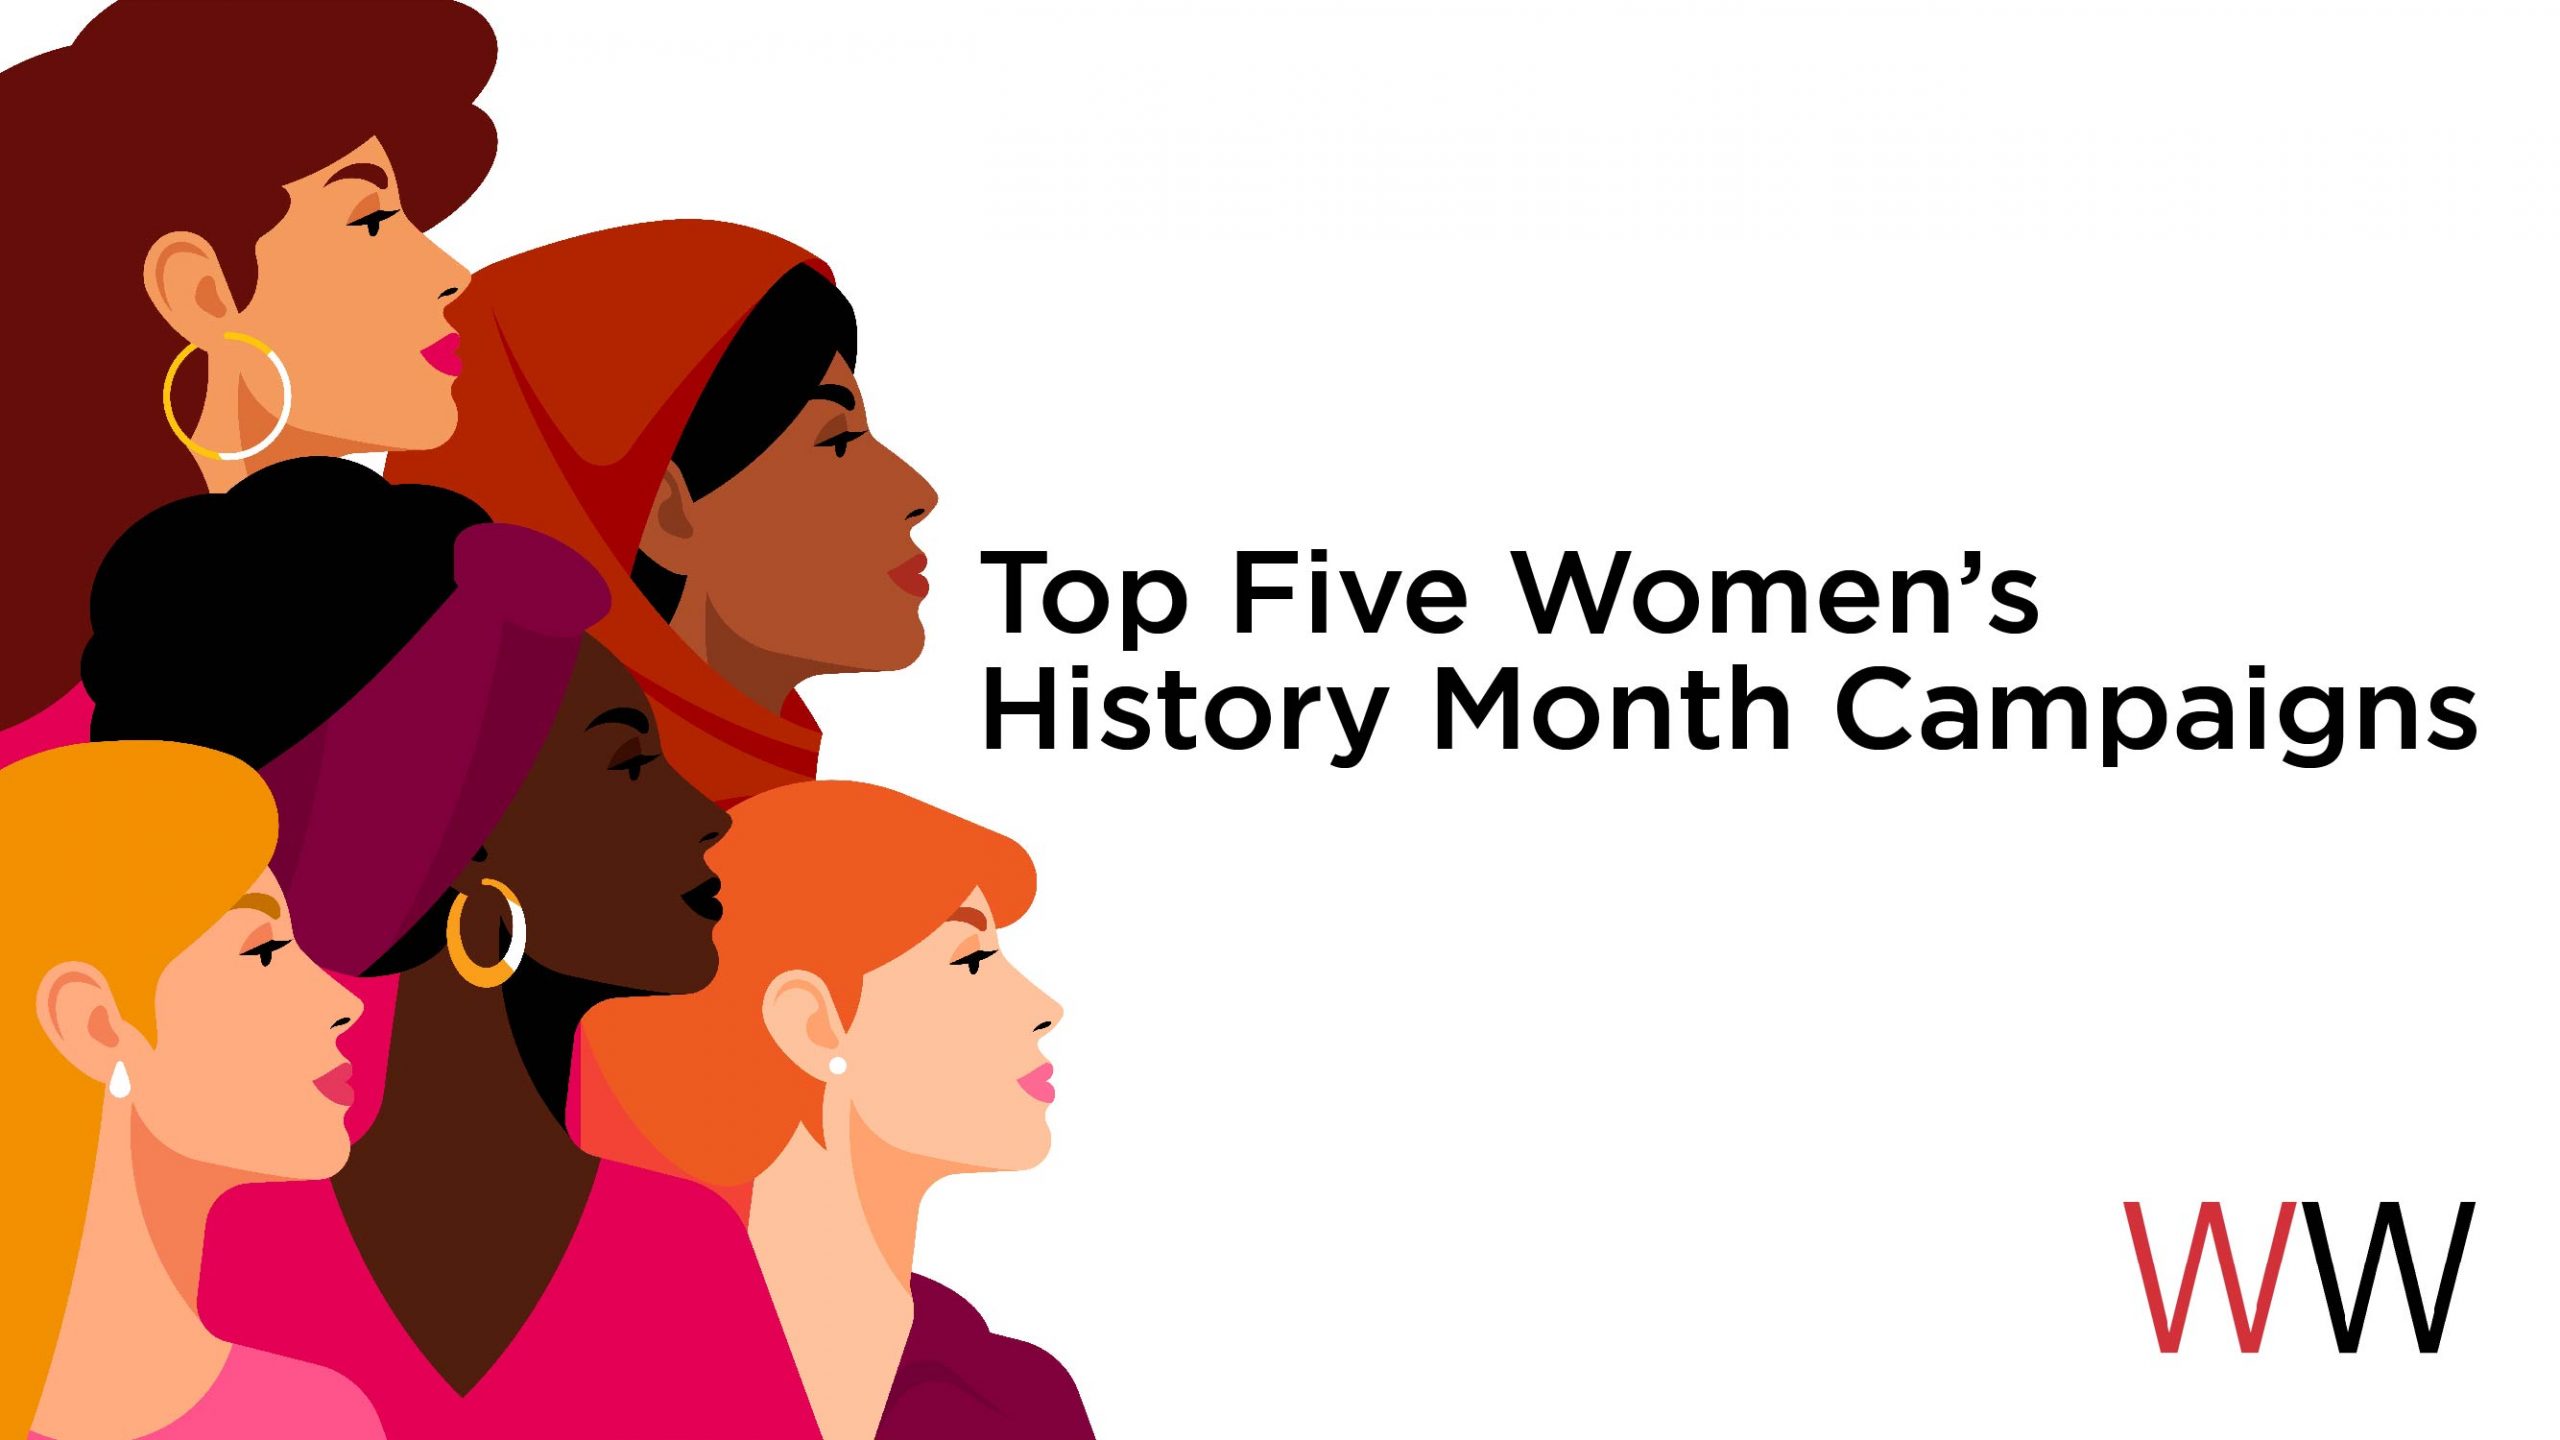 Top 5 Women’s History Month Campaigns